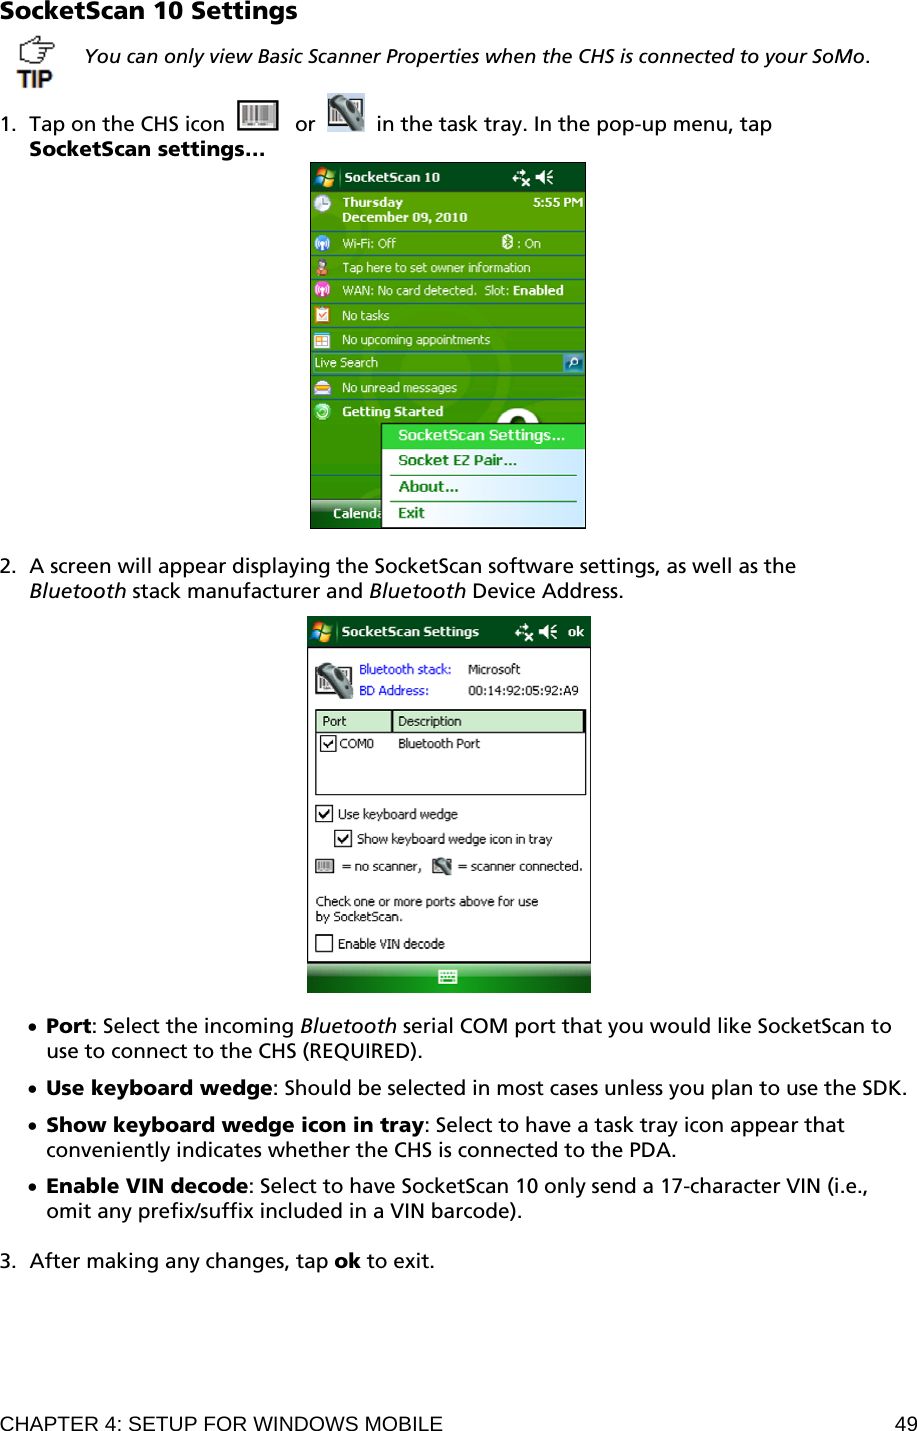 CHAPTER 4: SETUP FOR WINDOWS MOBILE  49 SocketScan 10 Settings  You can only view Basic Scanner Properties when the CHS is connected to your SoMo.  1. Tap on the CHS icon     or     in the task tray. In the pop-up menu, tap  SocketScan settings…   2. A screen will appear displaying the SocketScan software settings, as well as the Bluetooth stack manufacturer and Bluetooth Device Address.    • Port: Select the incoming Bluetooth serial COM port that you would like SocketScan to use to connect to the CHS (REQUIRED).  • Use keyboard wedge: Should be selected in most cases unless you plan to use the SDK.  • Show keyboard wedge icon in tray: Select to have a task tray icon appear that conveniently indicates whether the CHS is connected to the PDA.  • Enable VIN decode: Select to have SocketScan 10 only send a 17-character VIN (i.e., omit any prefix/suffix included in a VIN barcode).  3. After making any changes, tap ok to exit.  